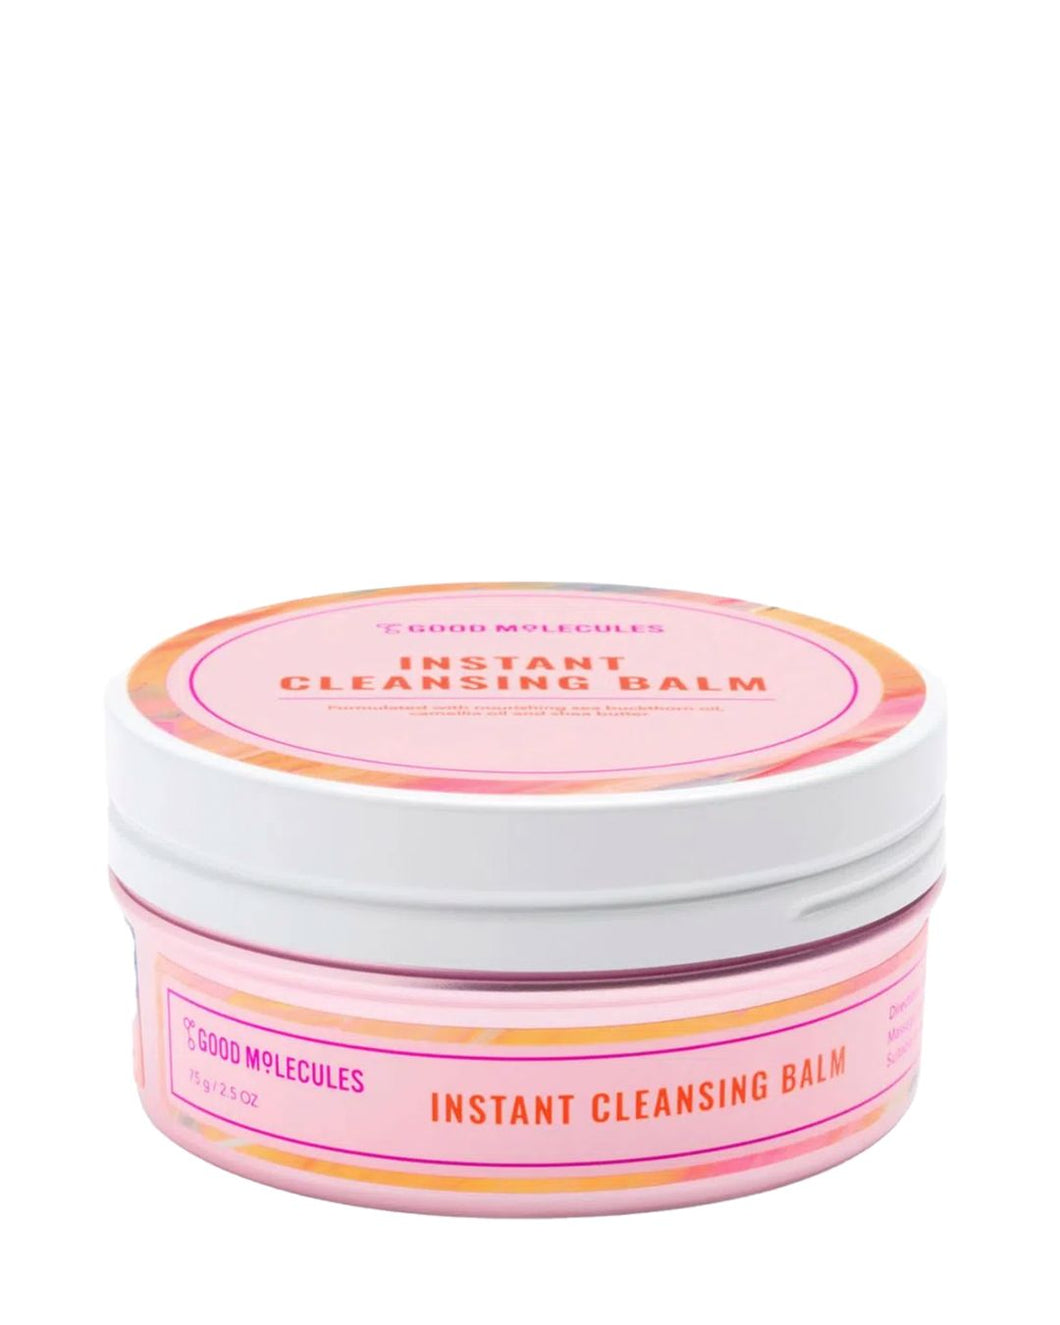 GOOD MOLECULES - Instant Cleansing Balm -